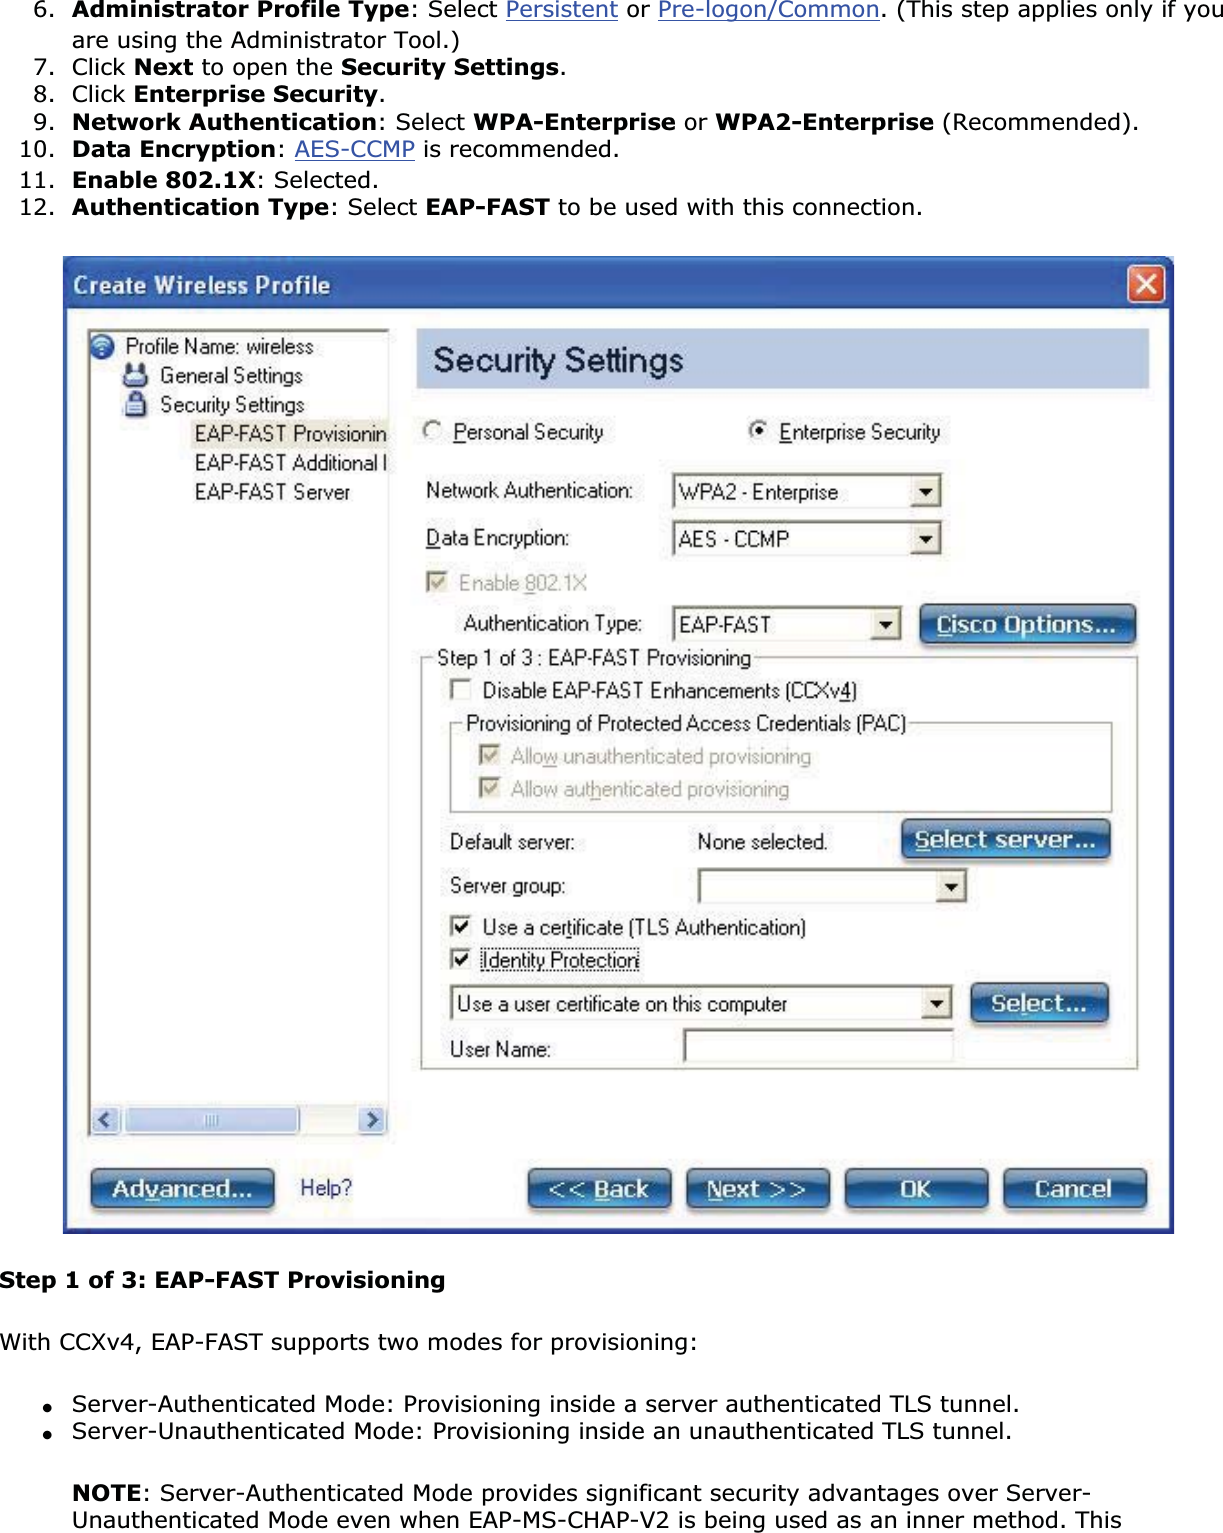 6. Administrator Profile Type: Select Persistent or Pre-logon/Common. (This step applies only if you are using the Administrator Tool.)7. Click Next to open the Security Settings.8. Click Enterprise Security.9. Network Authentication: Select WPA-Enterprise or WPA2-Enterprise (Recommended).10. Data Encryption:AES-CCMP is recommended.11. Enable 802.1X: Selected.12. Authentication Type: Select EAP-FAST to be used with this connection.Step 1 of 3: EAP-FAST Provisioning With CCXv4, EAP-FAST supports two modes for provisioning:●Server-Authenticated Mode: Provisioning inside a server authenticated TLS tunnel.●Server-Unauthenticated Mode: Provisioning inside an unauthenticated TLS tunnel.NOTE: Server-Authenticated Mode provides significant security advantages over Server-Unauthenticated Mode even when EAP-MS-CHAP-V2 is being used as an inner method. This 